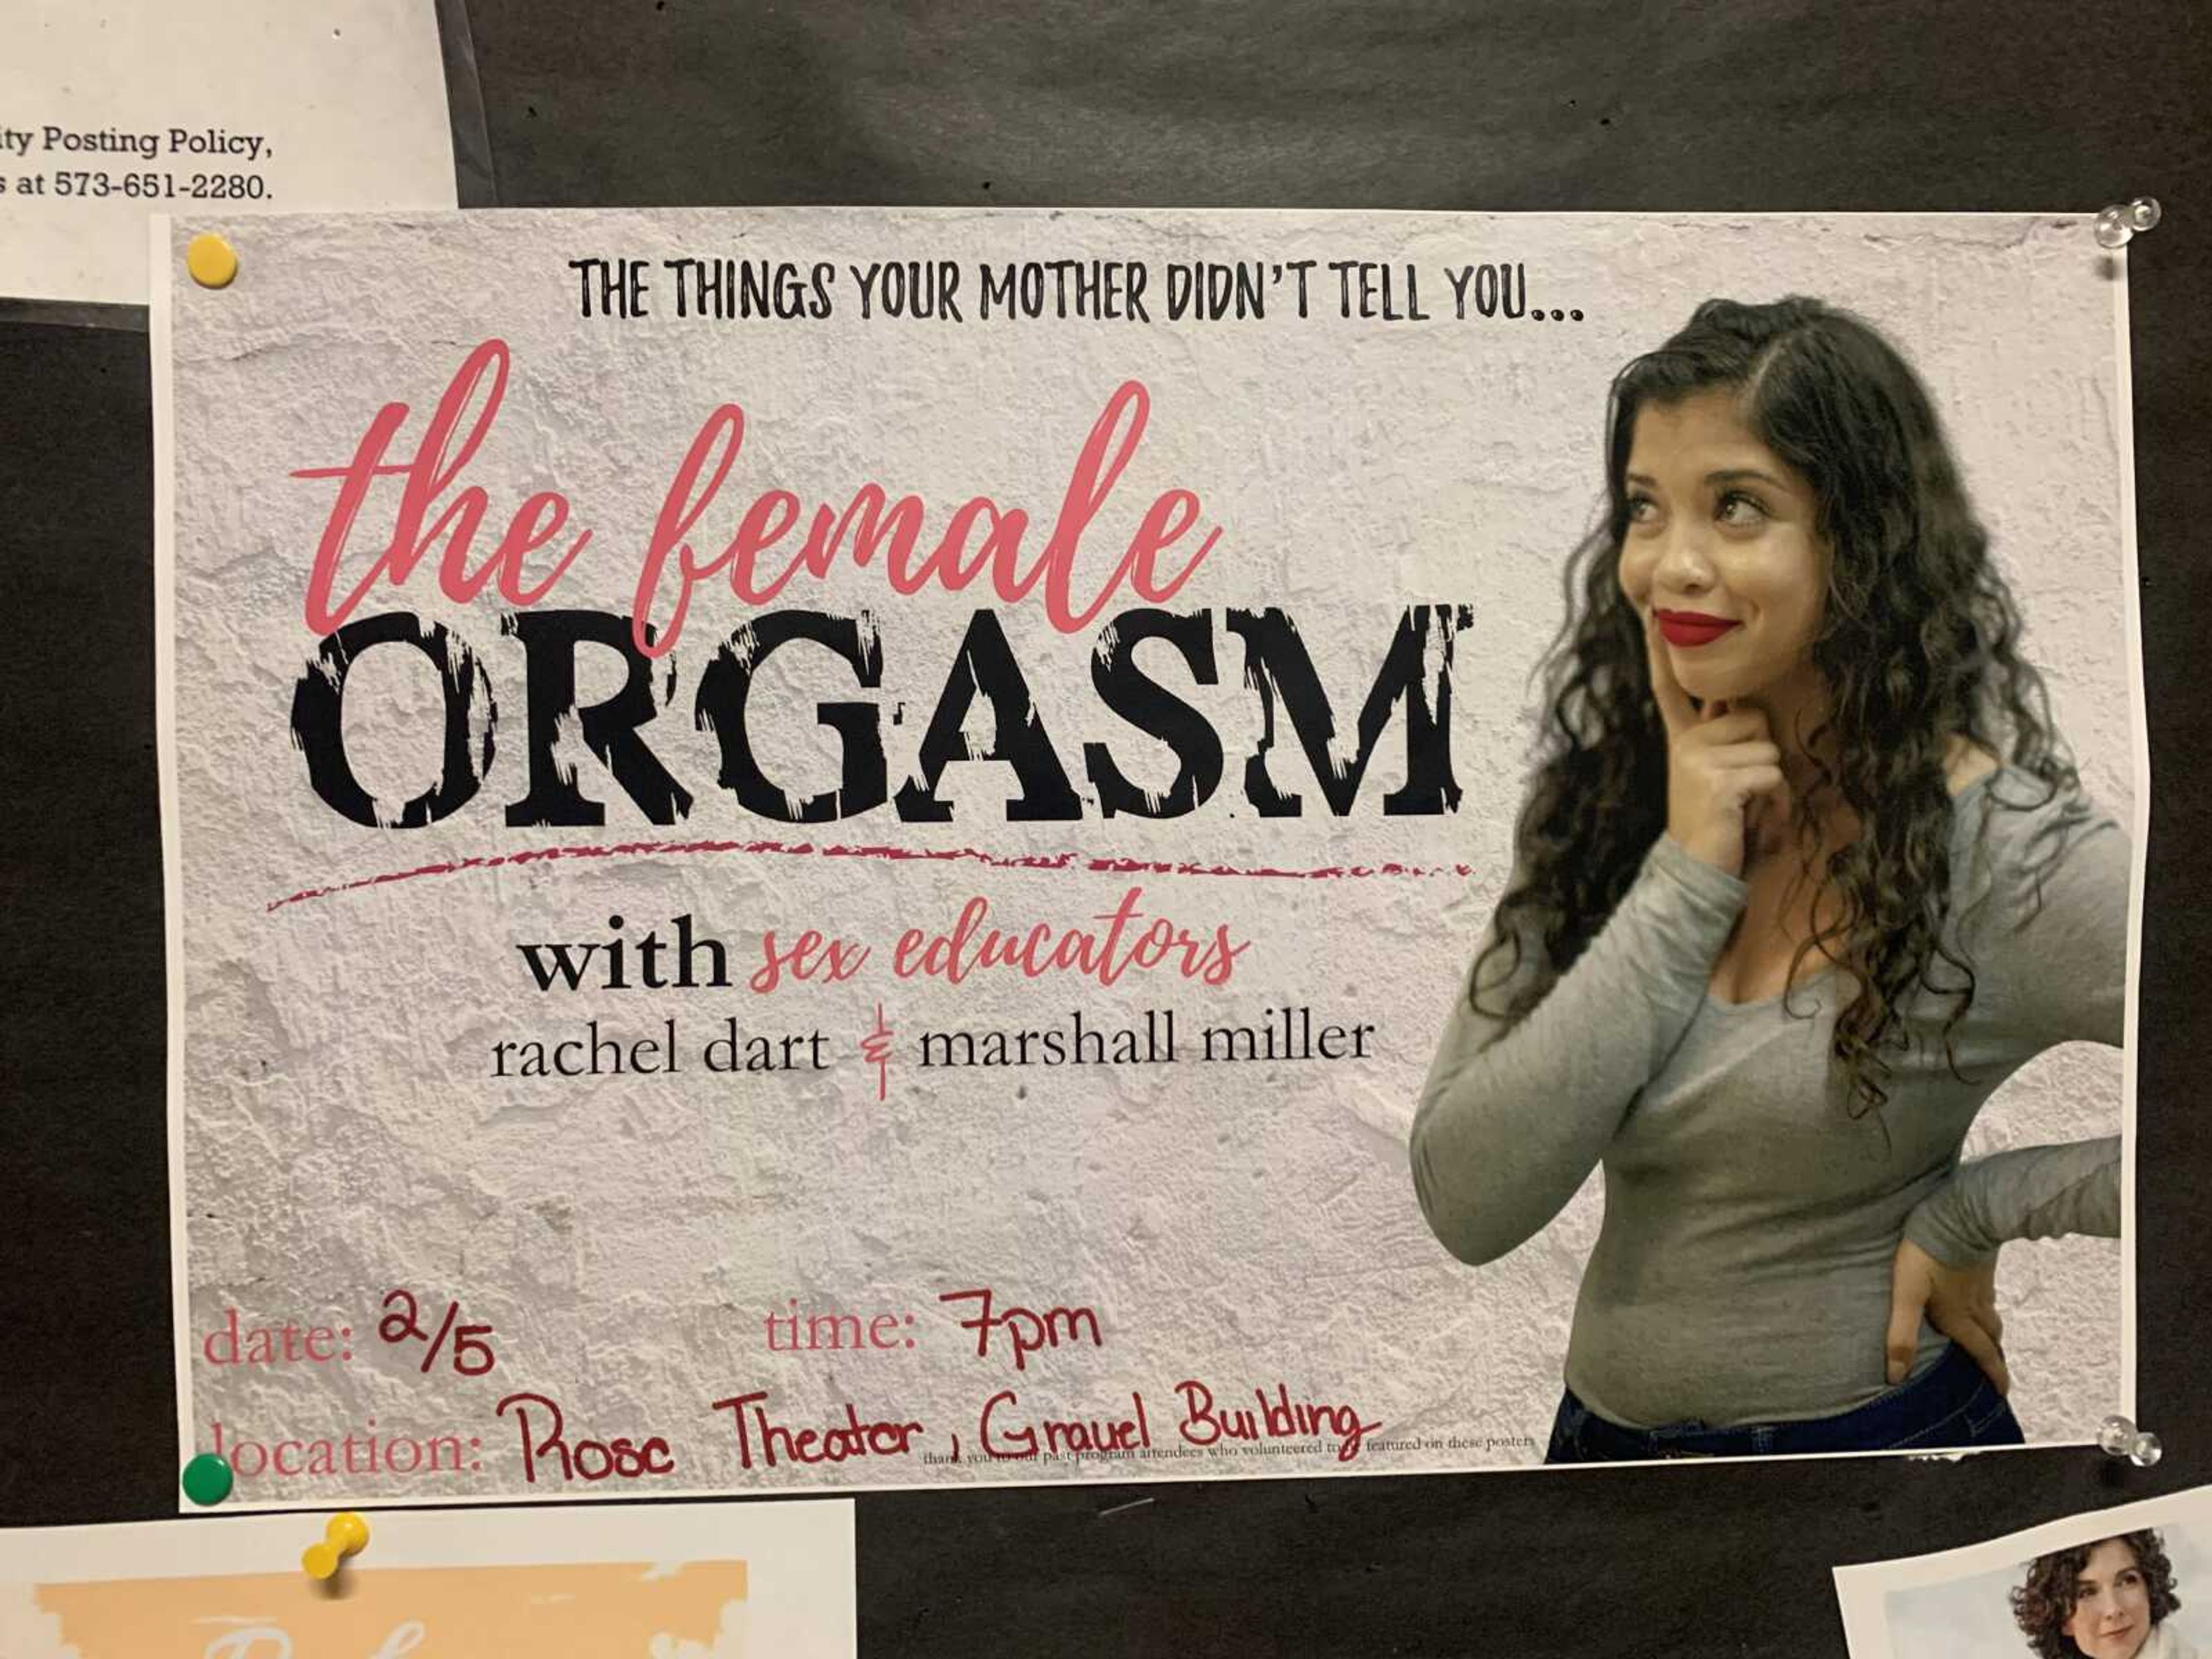 Let's talk about … orgasms?